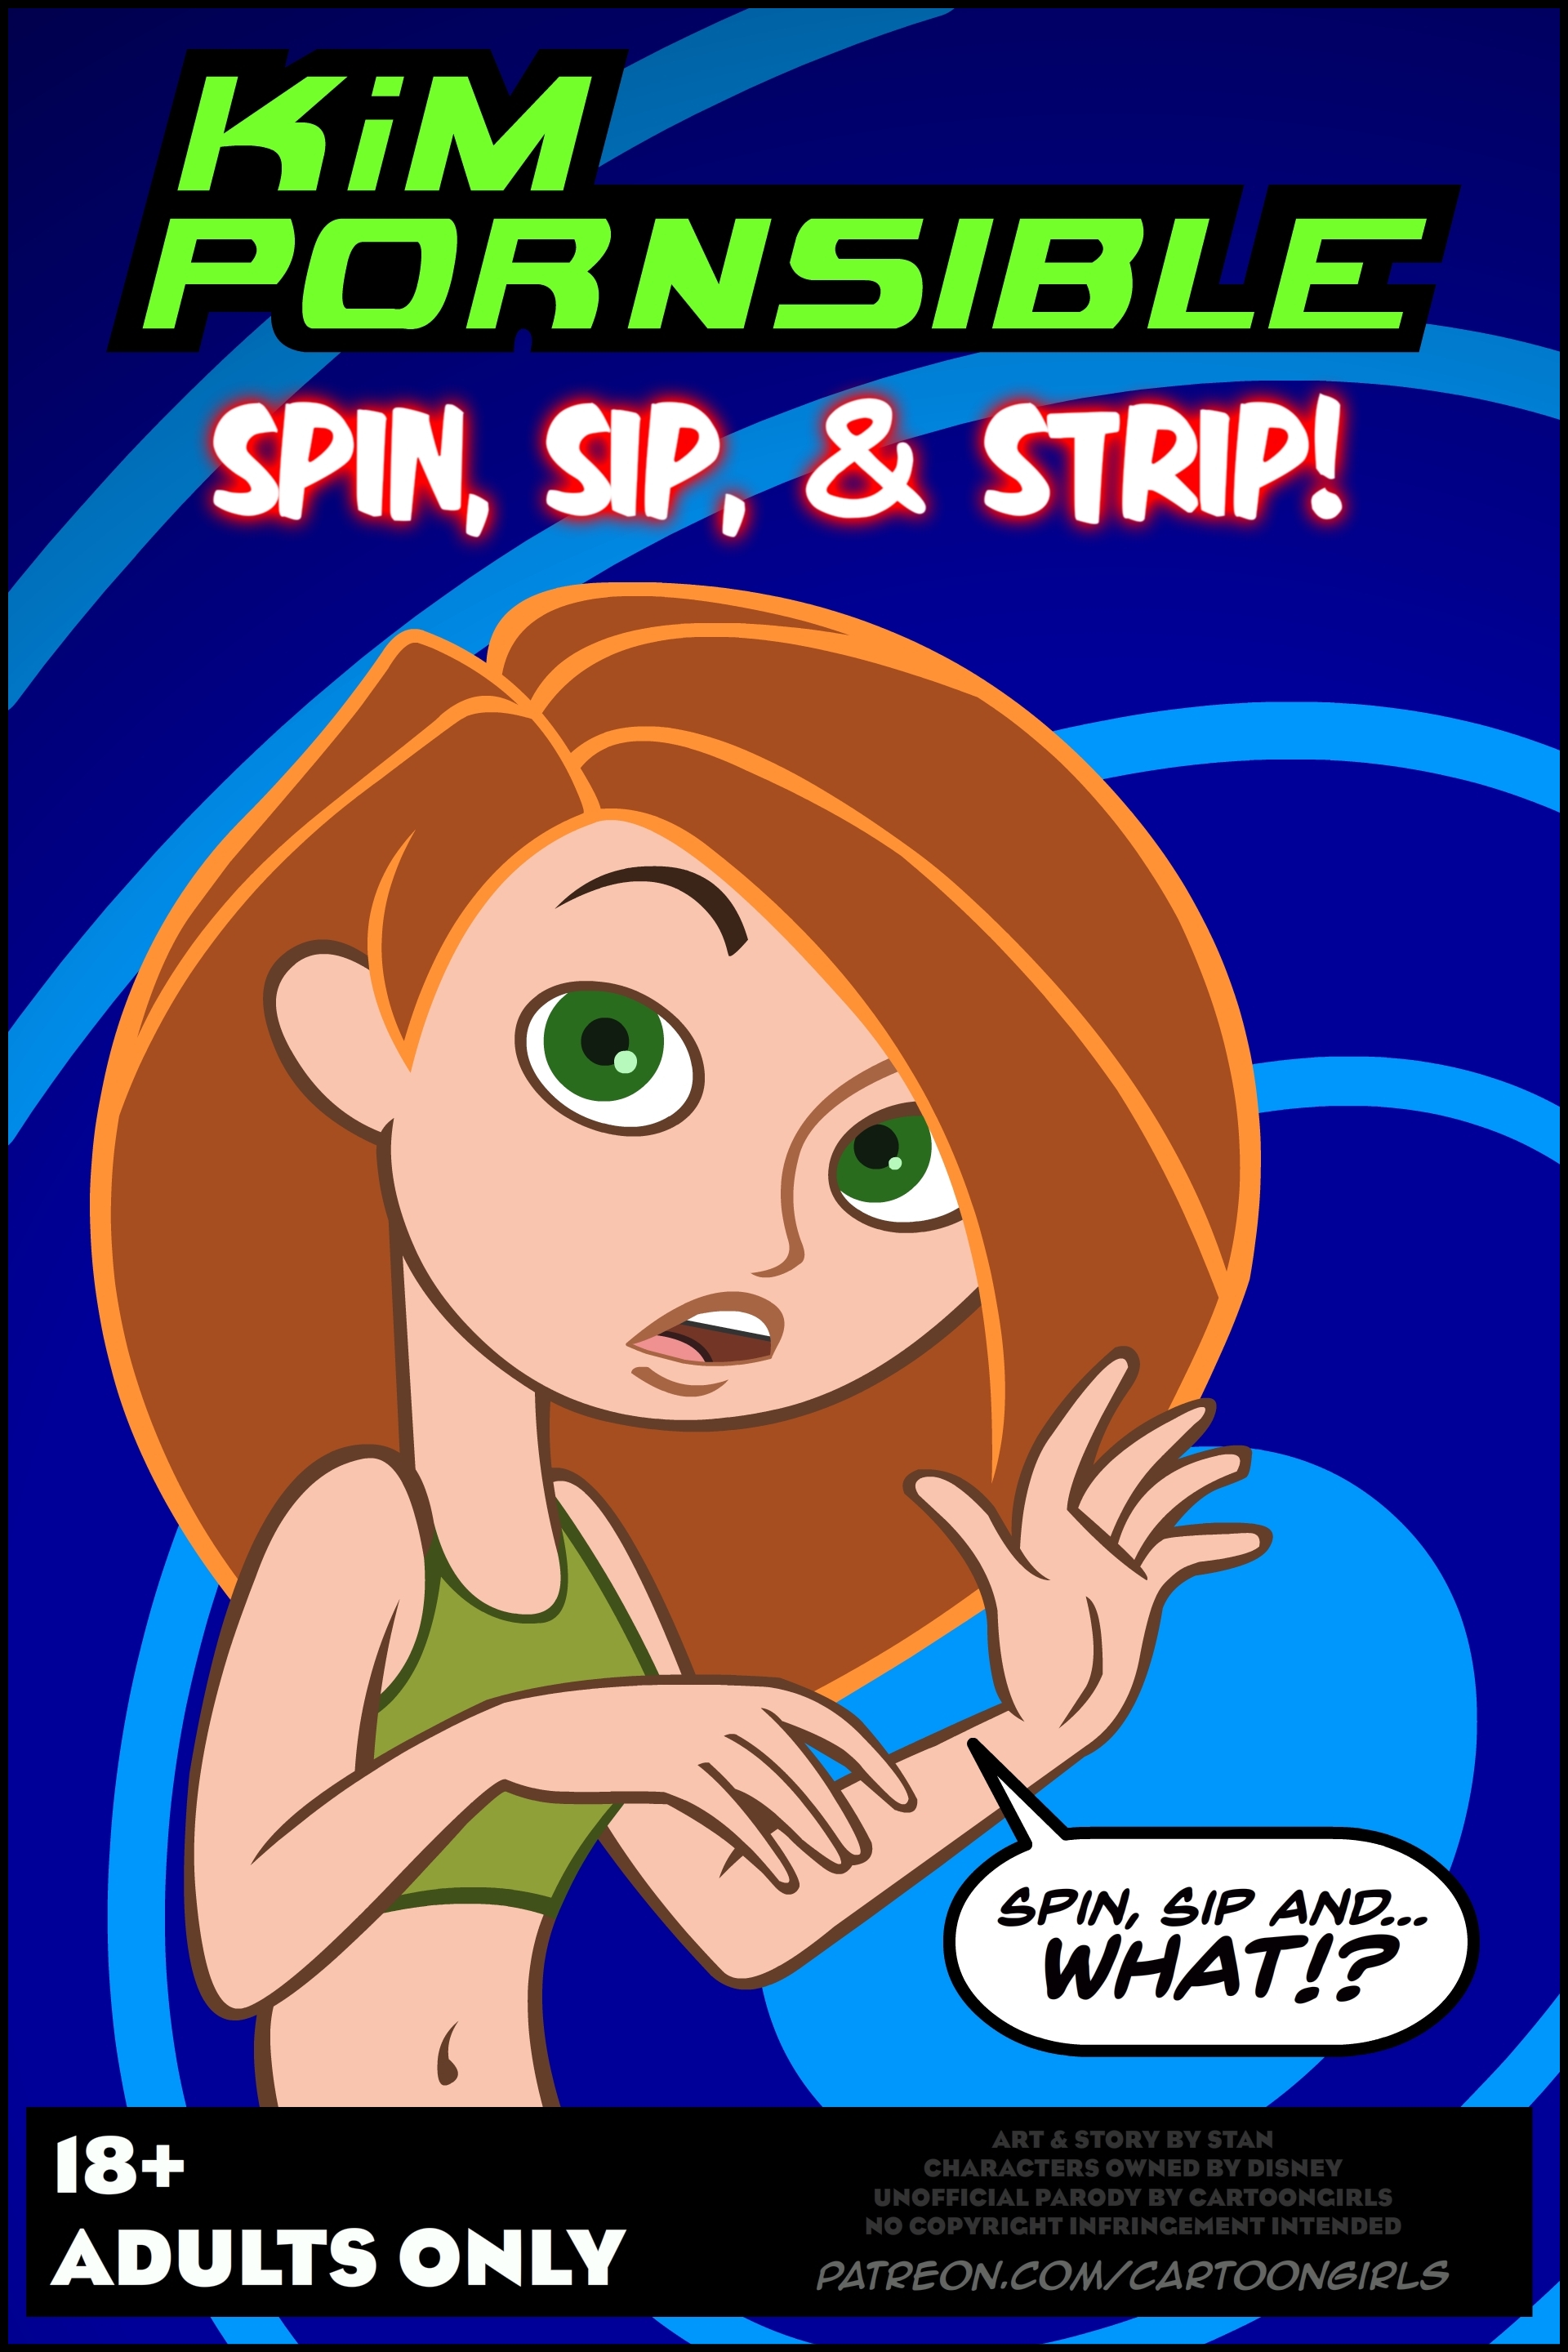 Cartoongirls - Kim Possible Spin, Sip and Strip